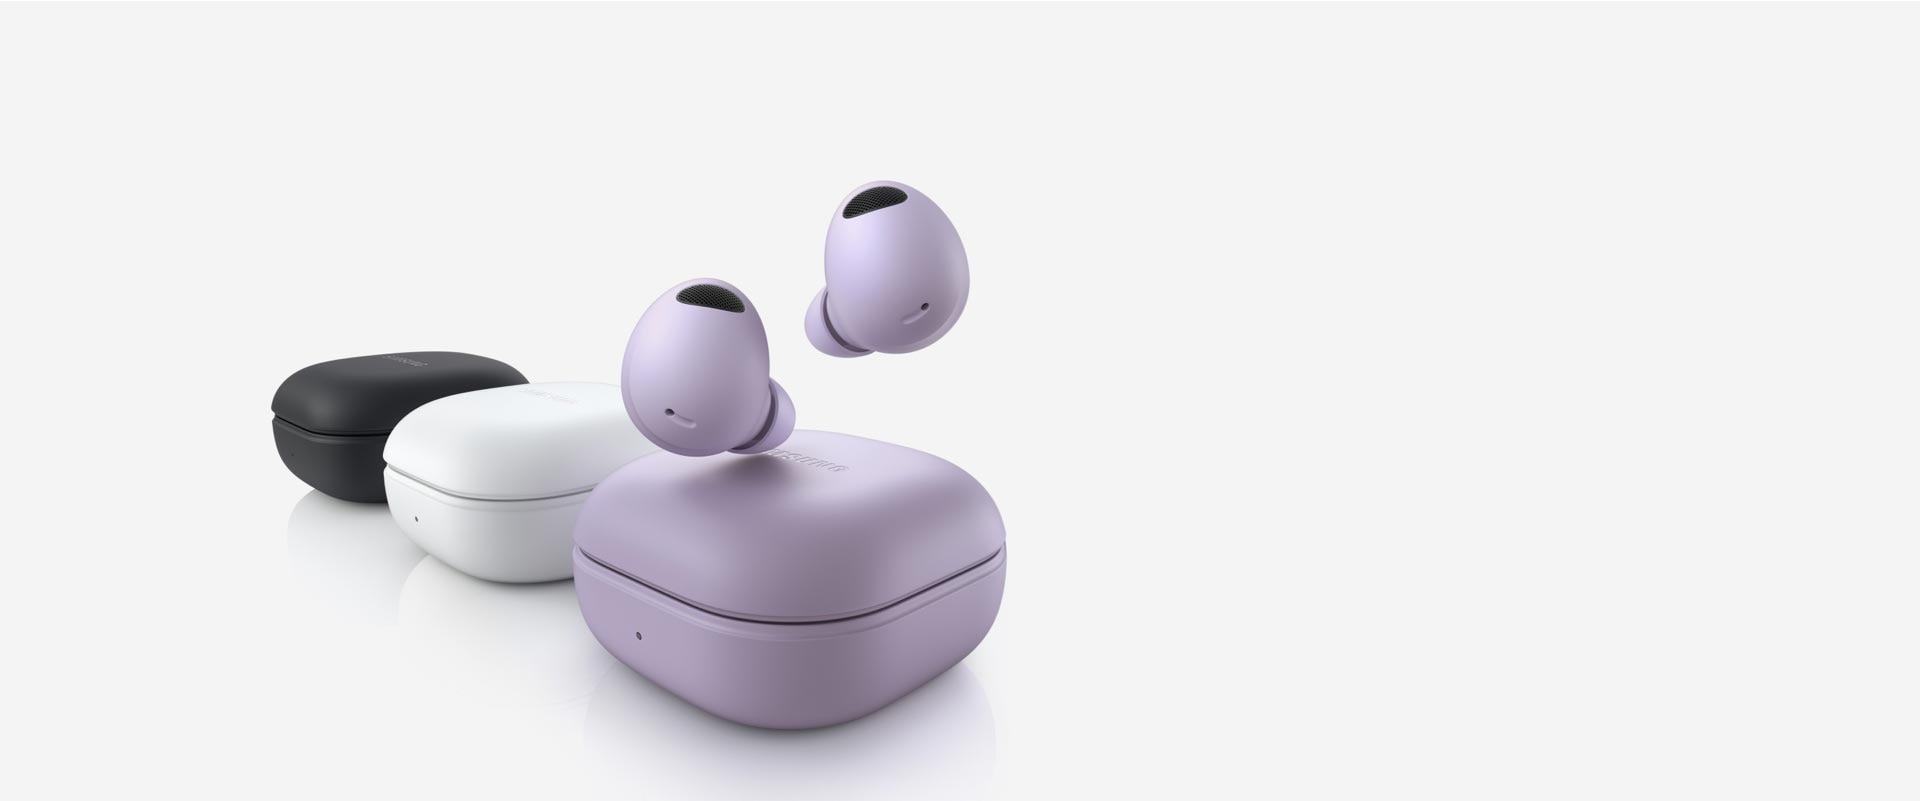 Three Galaxy Buds2 Pro devices are lined up. The Bora Purple Galaxy Buds2 Pro device in the front has two earbuds hovering above the closed case. The middle White closed case is followed by a closed Graphite Galaxy Buds2 Pro case.